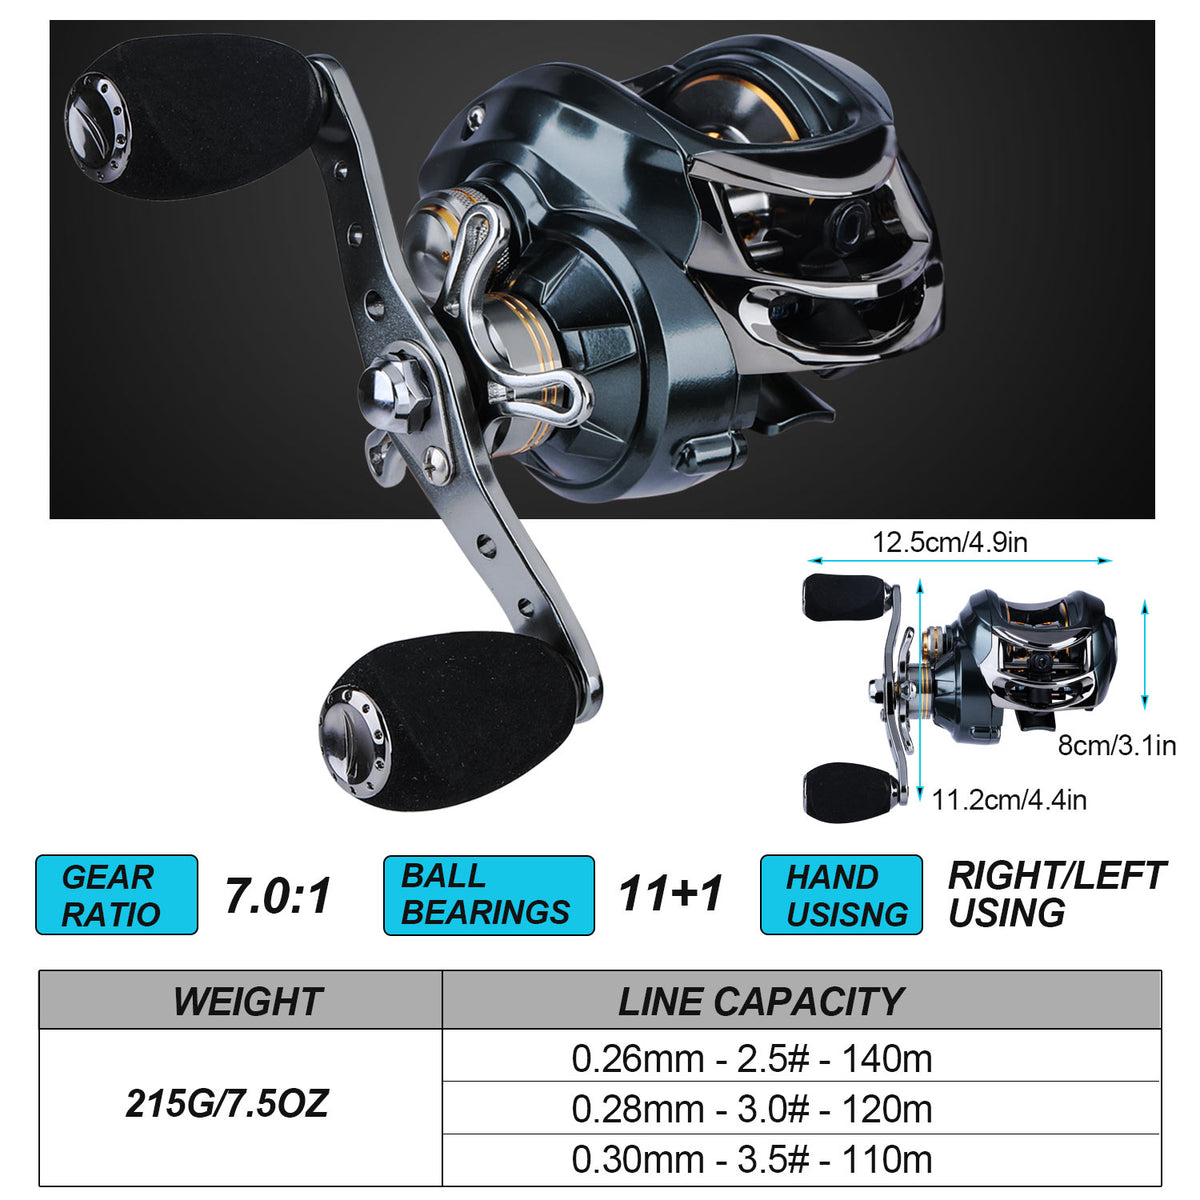 Sougayilang Fishing Baitcasting Combos, Lightweight Carbon Fiber Fishing  Pole and 9+1BB Corrosion Resistant Bearings Fishing Reel-Left Hand for  Travel